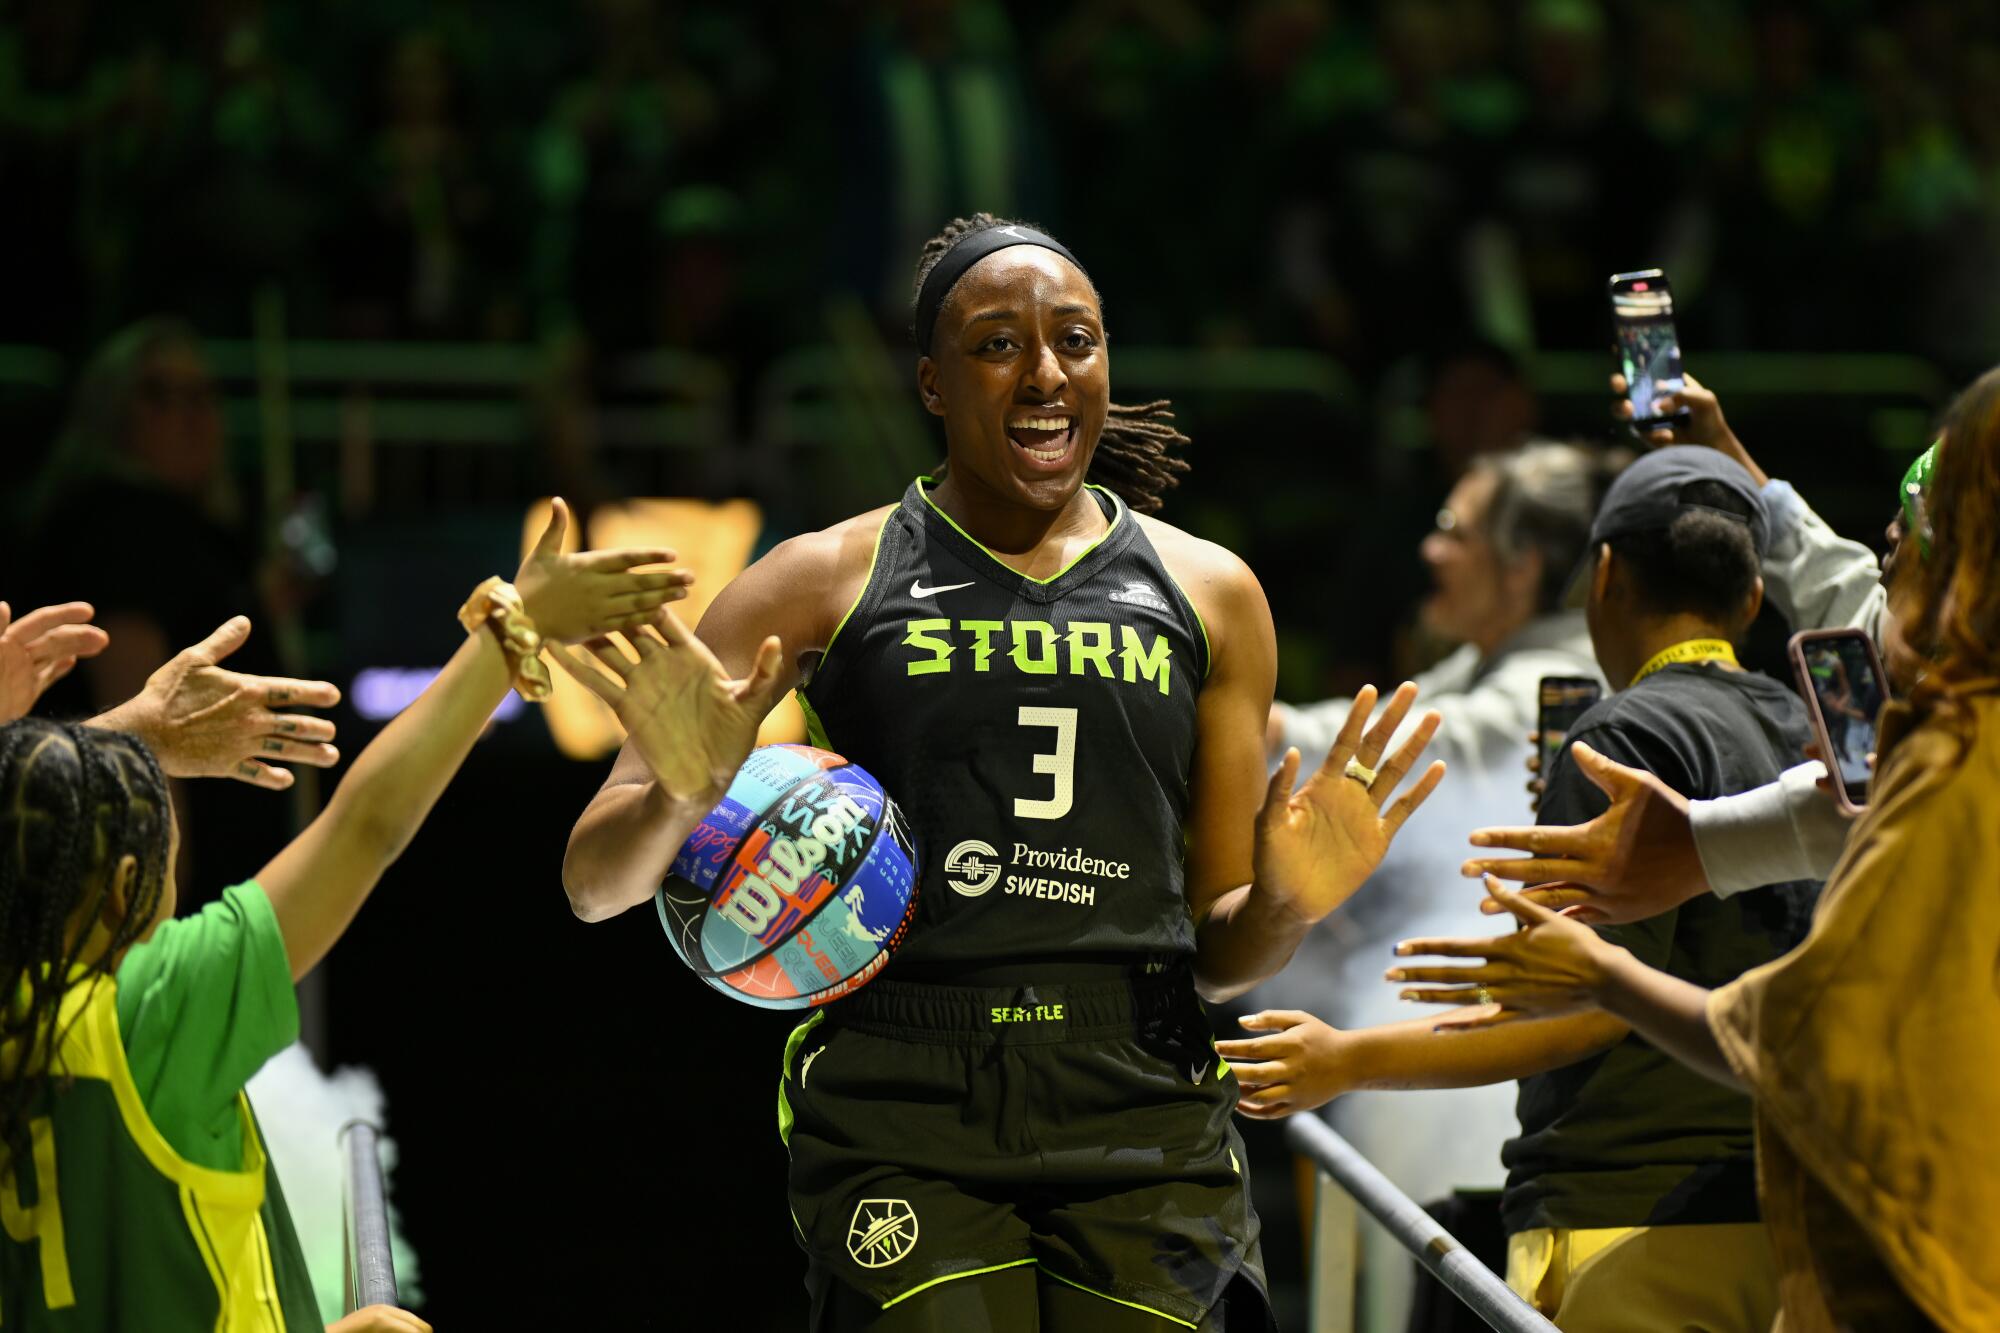 Seattle Storm forward Nneka Ogwumike runs on the court before a game against the Minnesota Lynx on May 14.